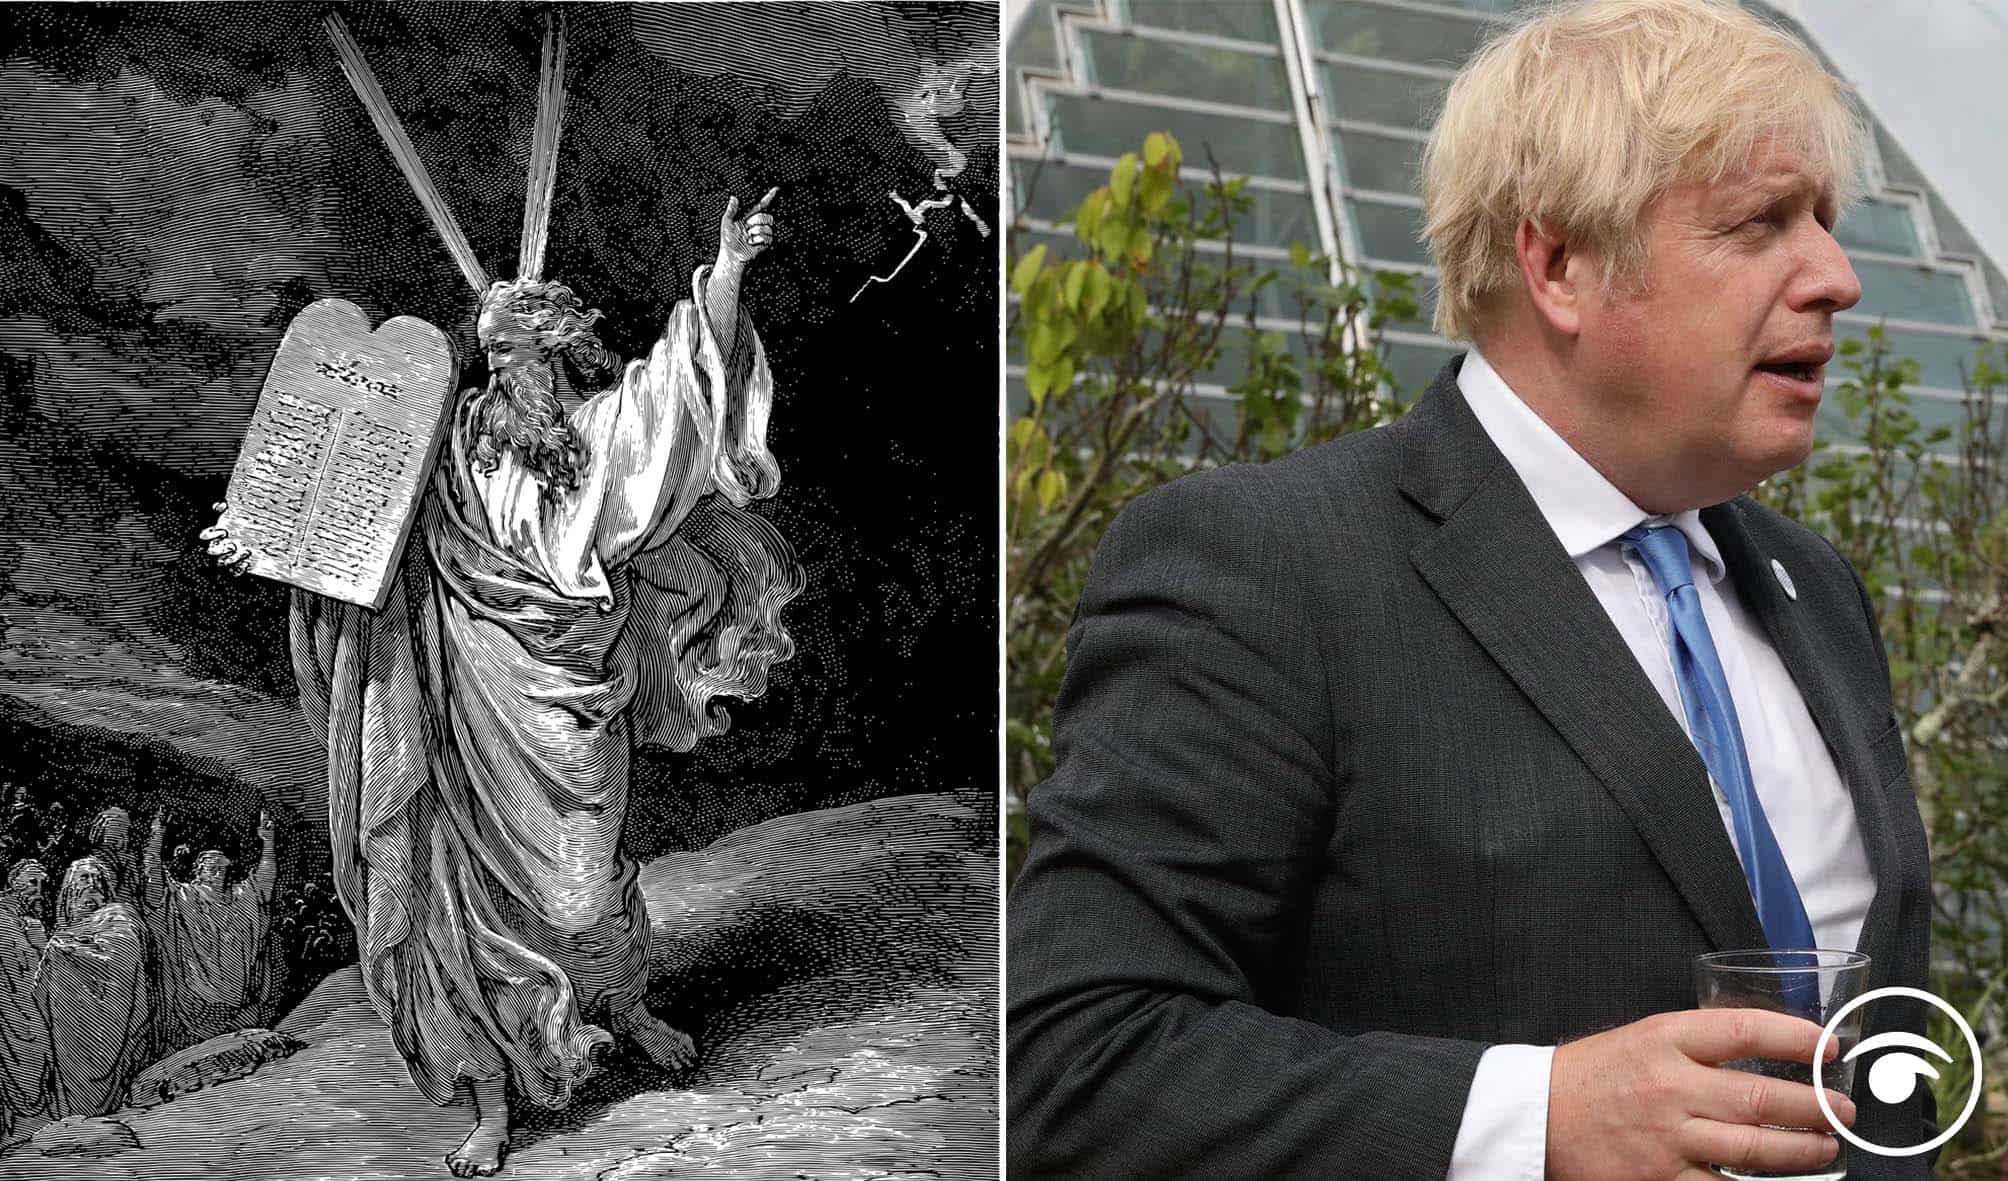 Johnson claims he’s the Moses of climate change… not everyone agrees